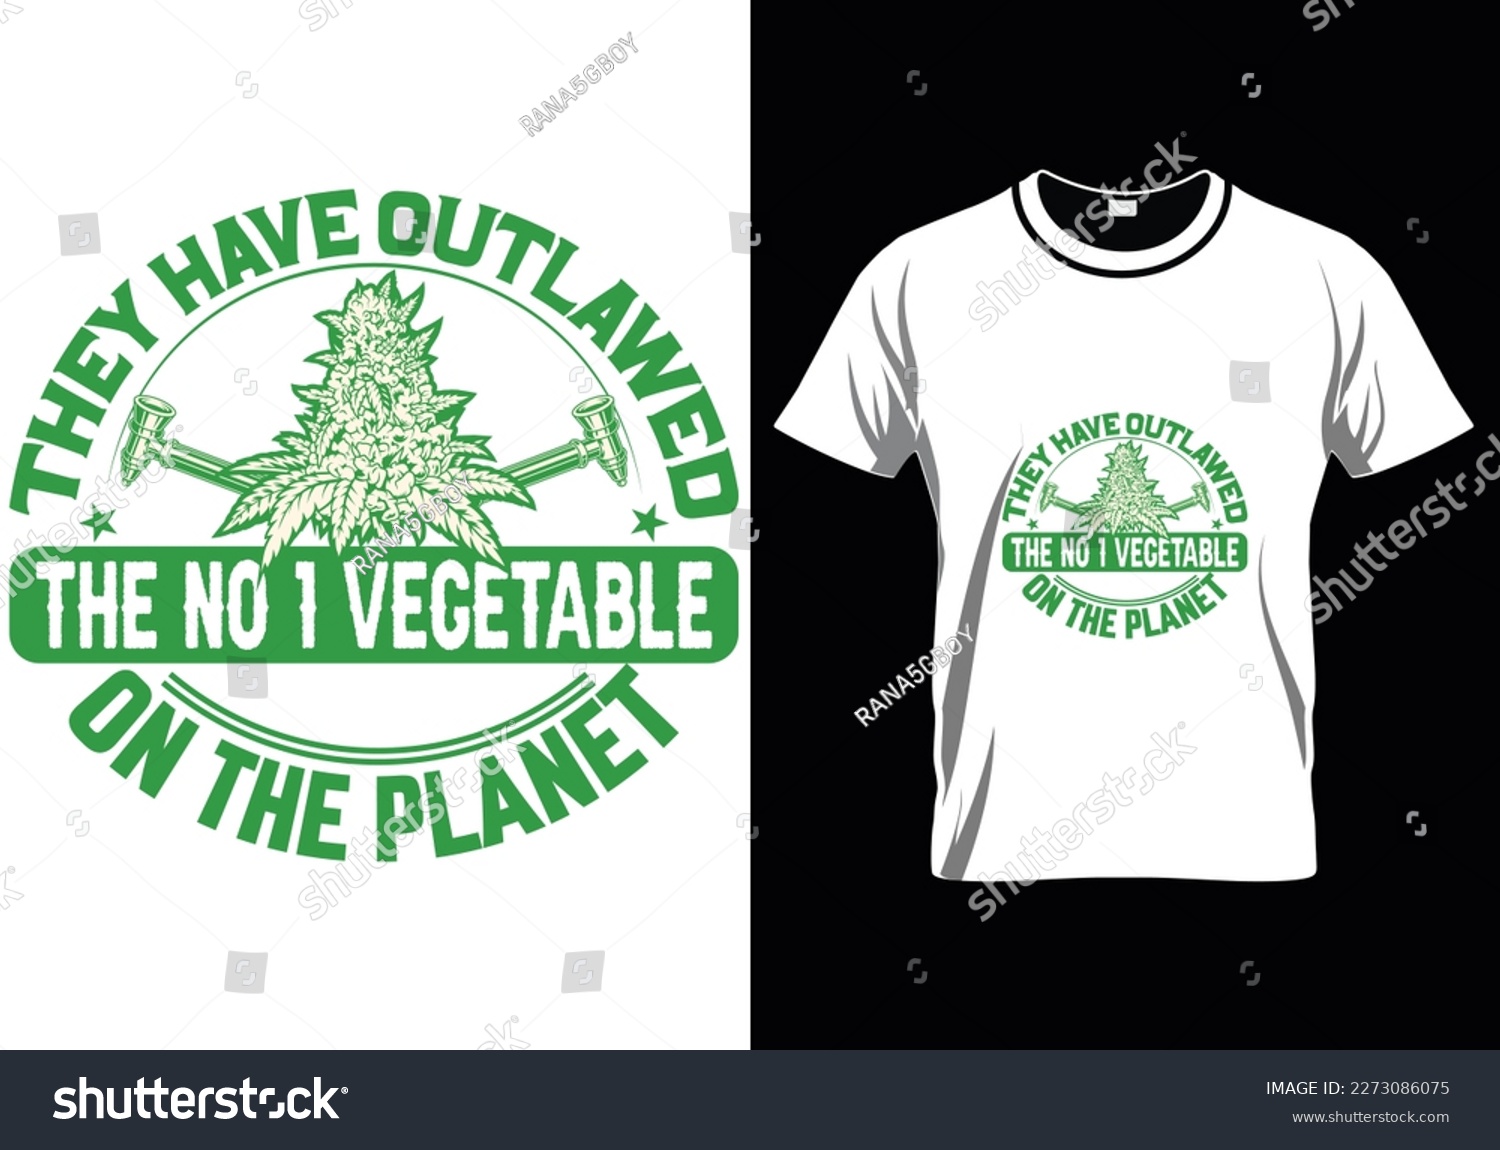 SVG of They Have Outlawed The Weed T-Shirt Design svg